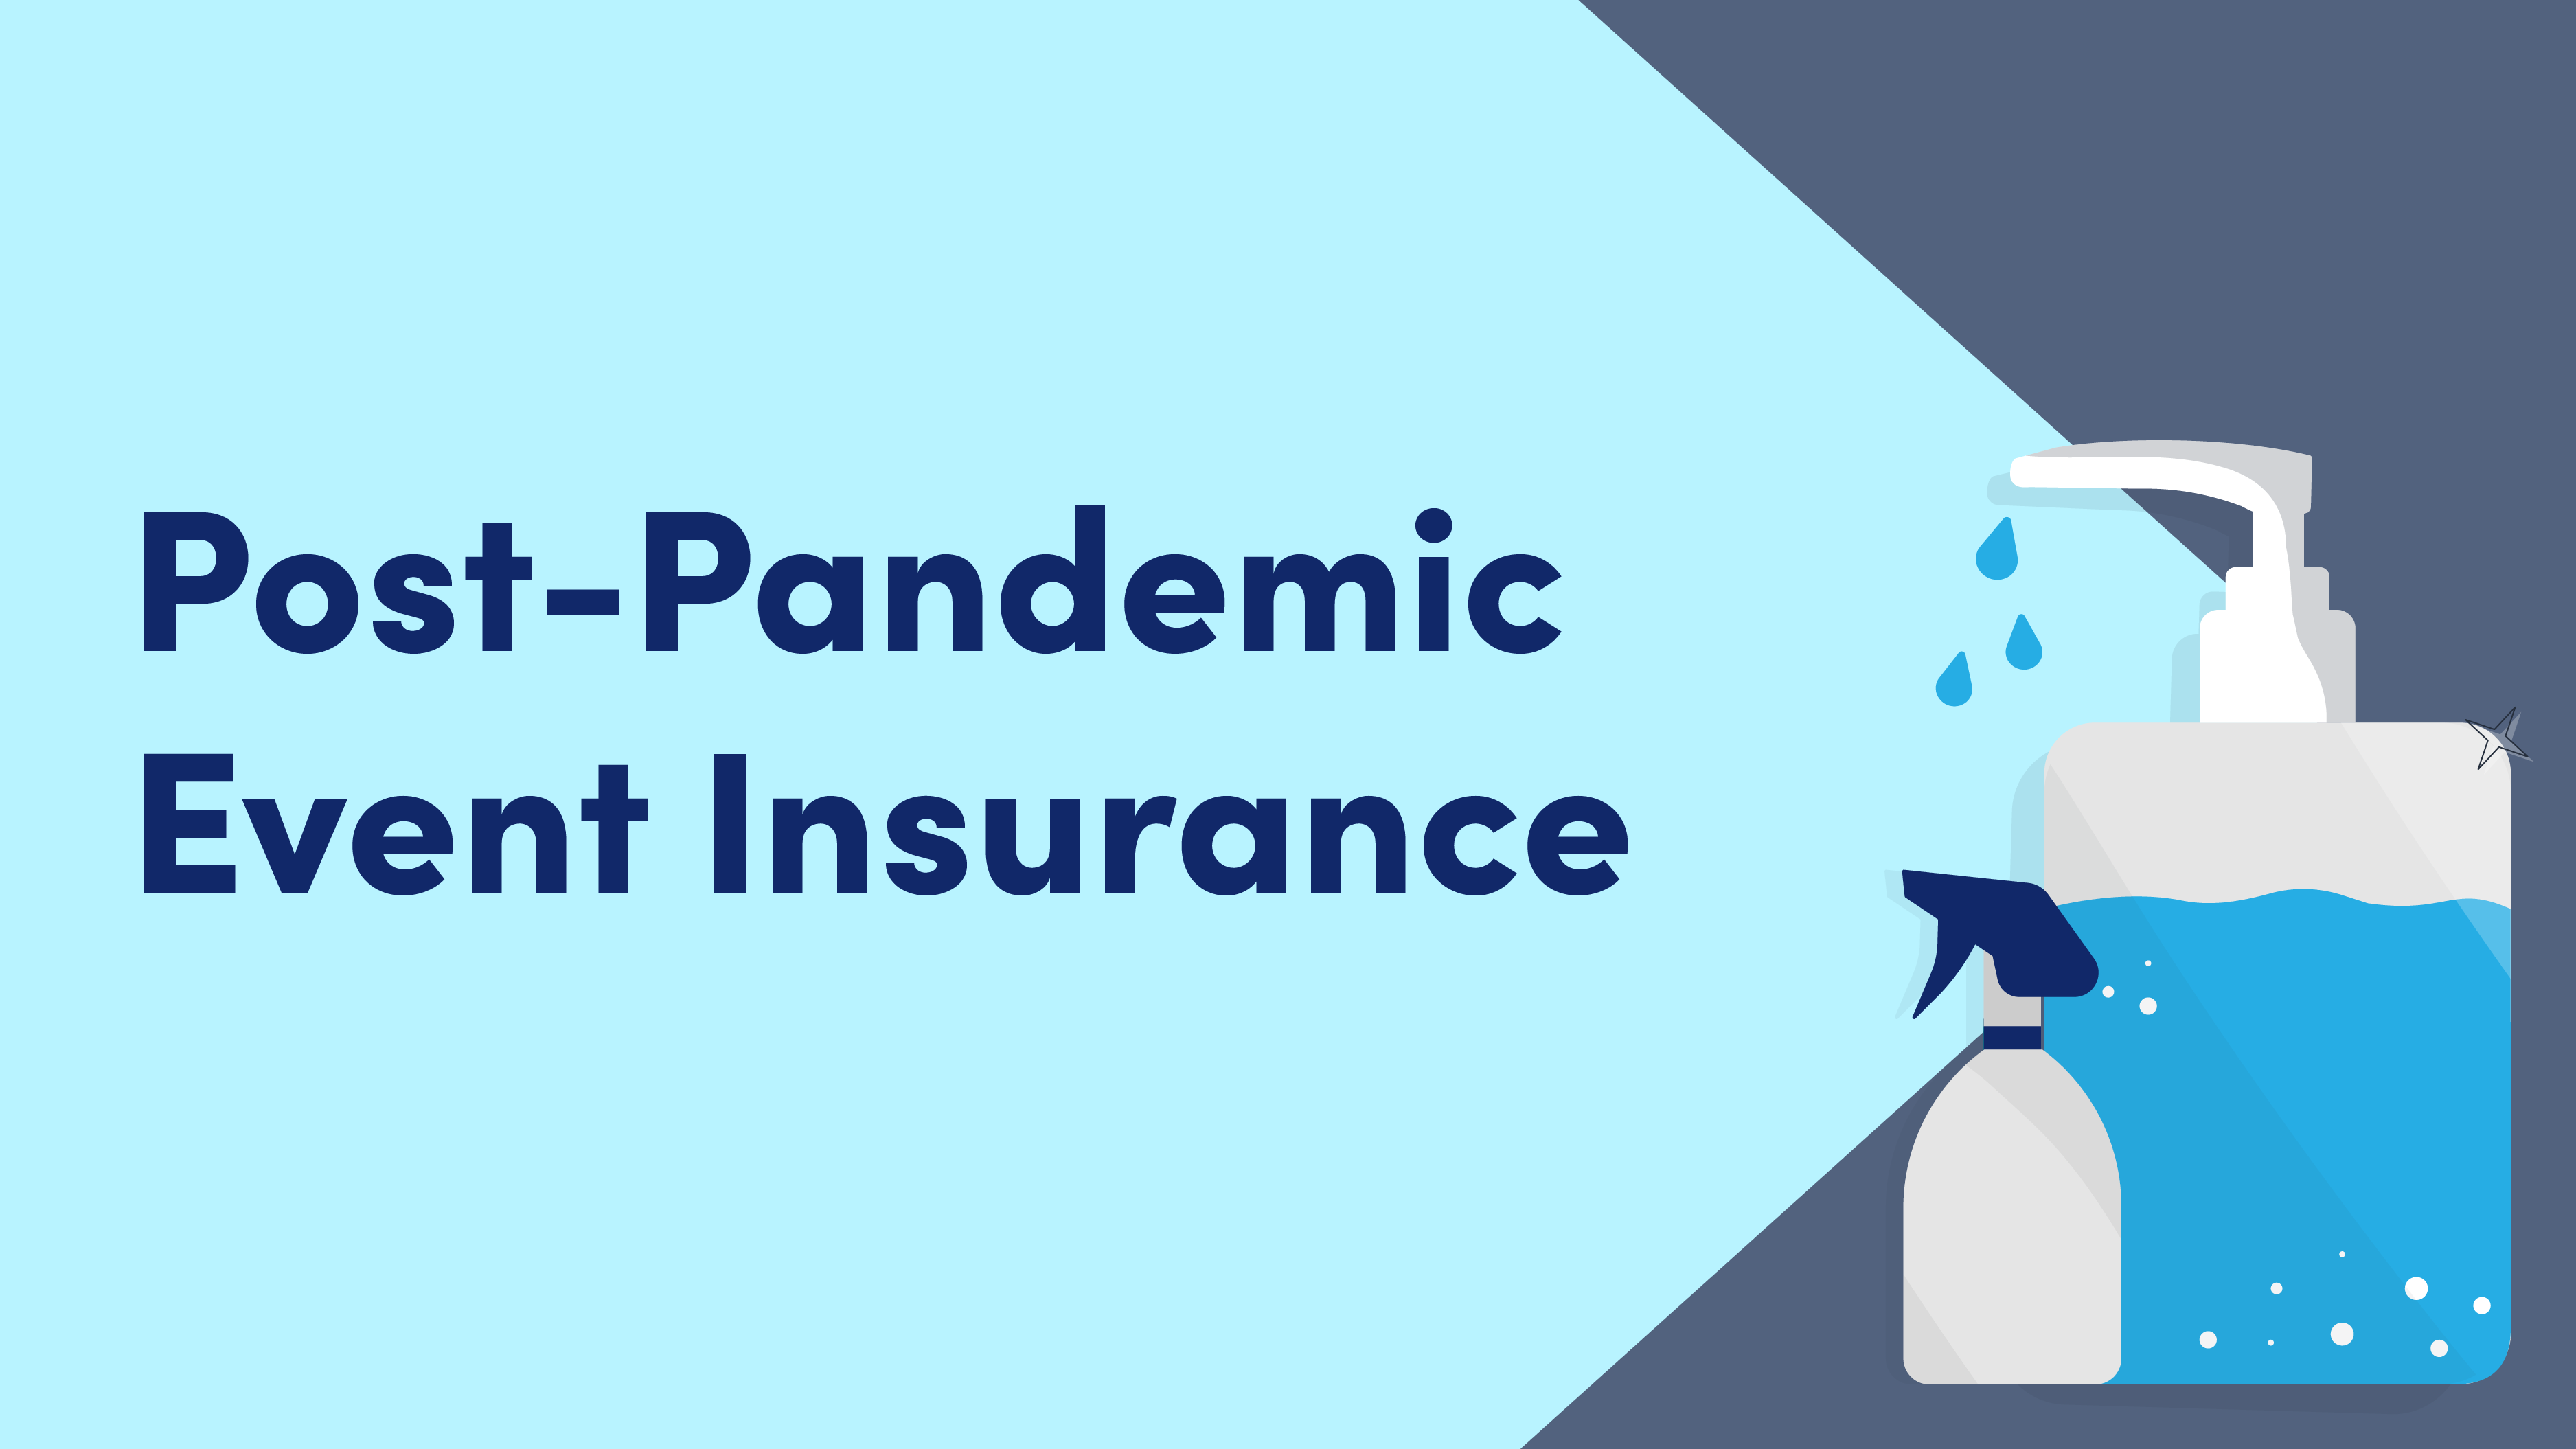 Post-Pandemic Event Insurance 2021: 5 Tips to Mitigate Risk